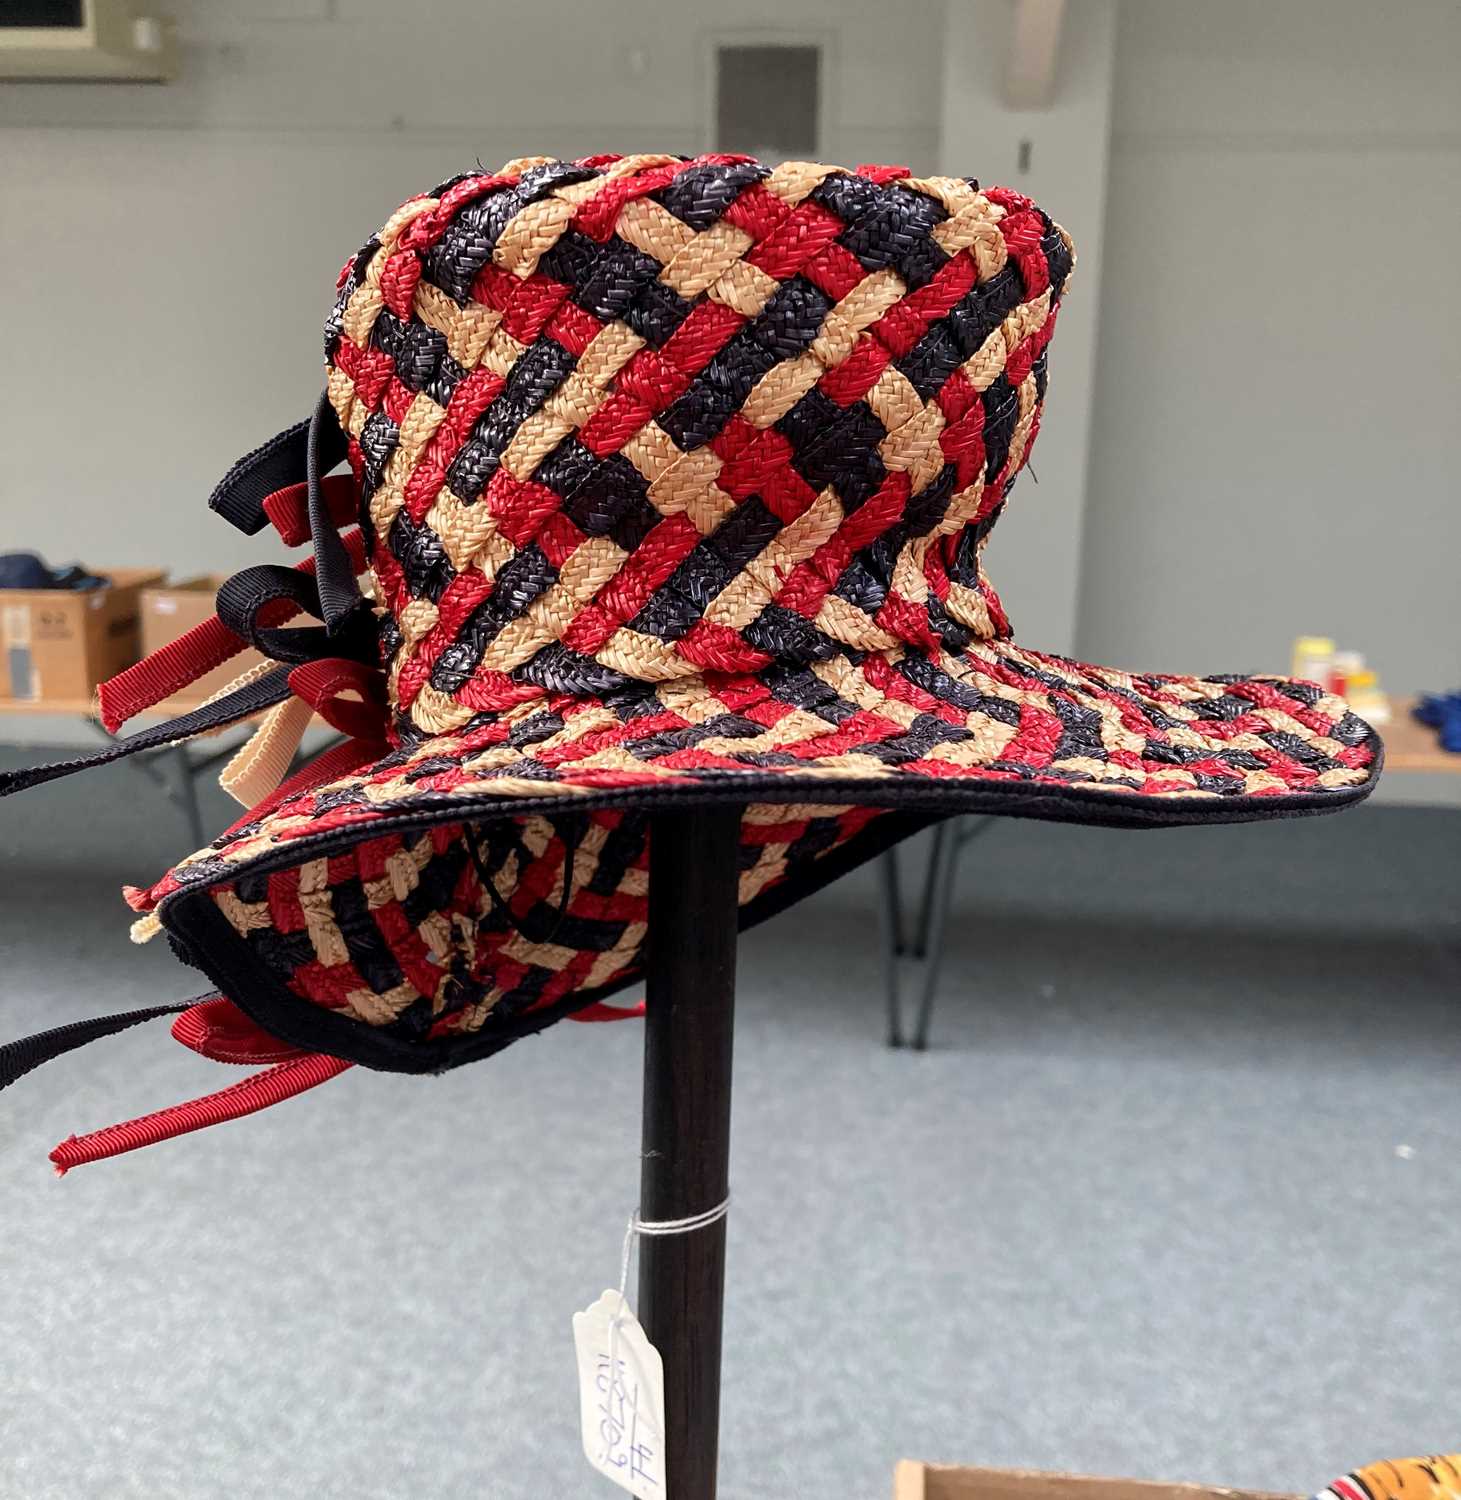 Circa 1940s Amercian Red, White and Blue Woven Raffia Tilt Hat, with alternating coloured - Image 2 of 4